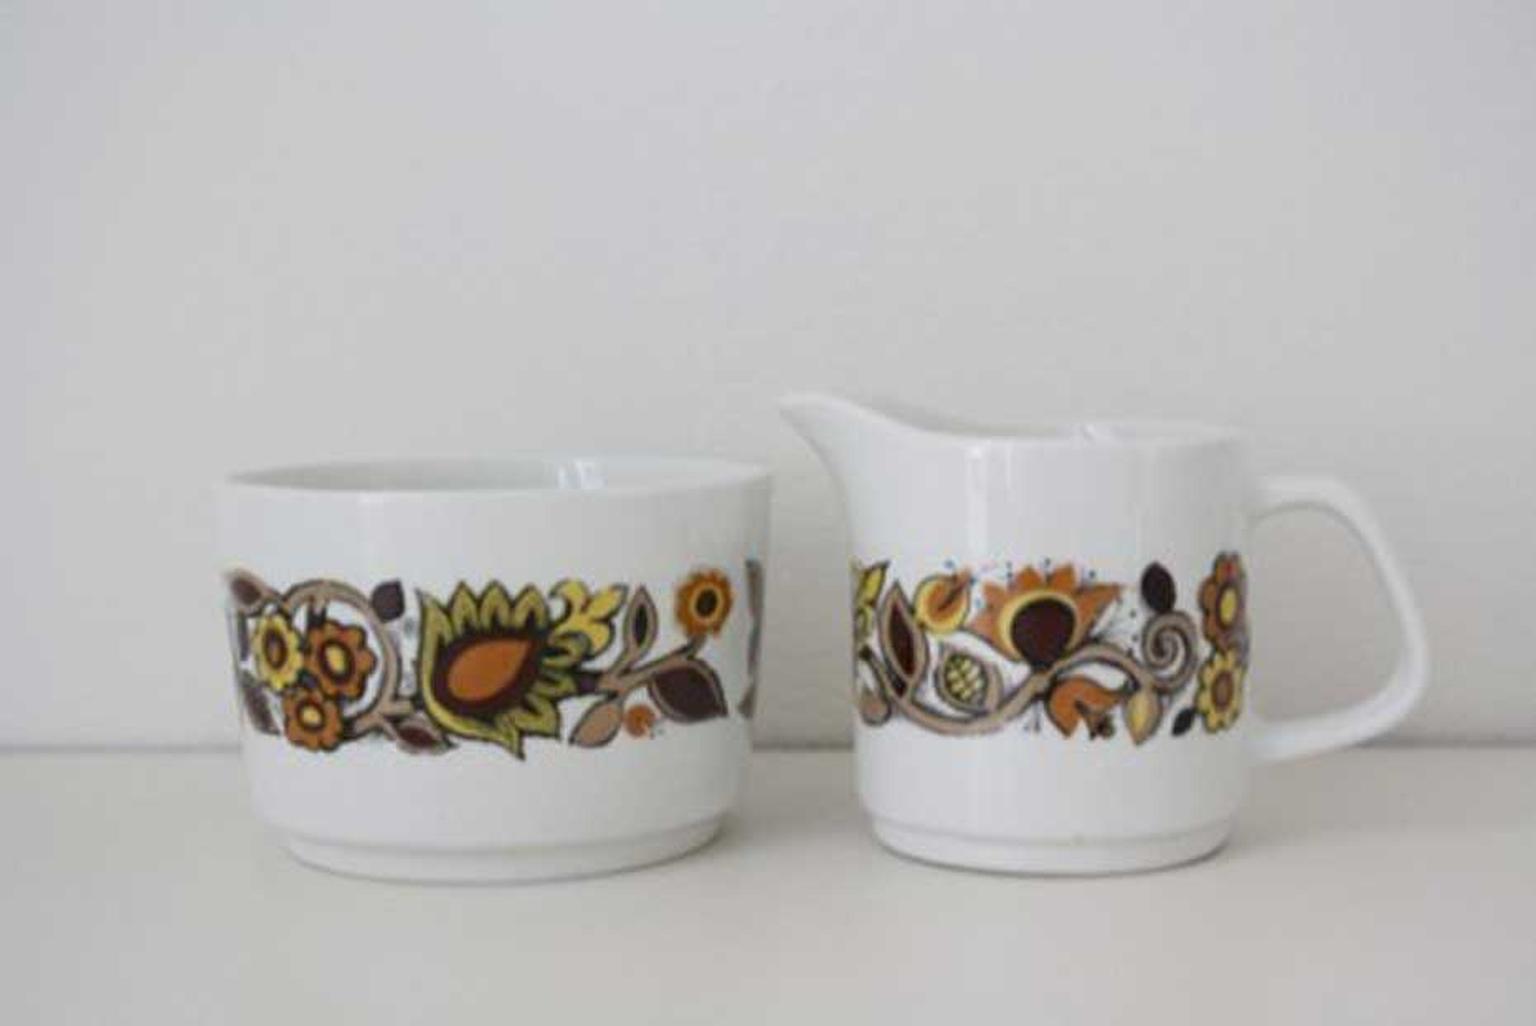 Louis Vuitton jug and sugar bowl set from the 60s Flower collection.